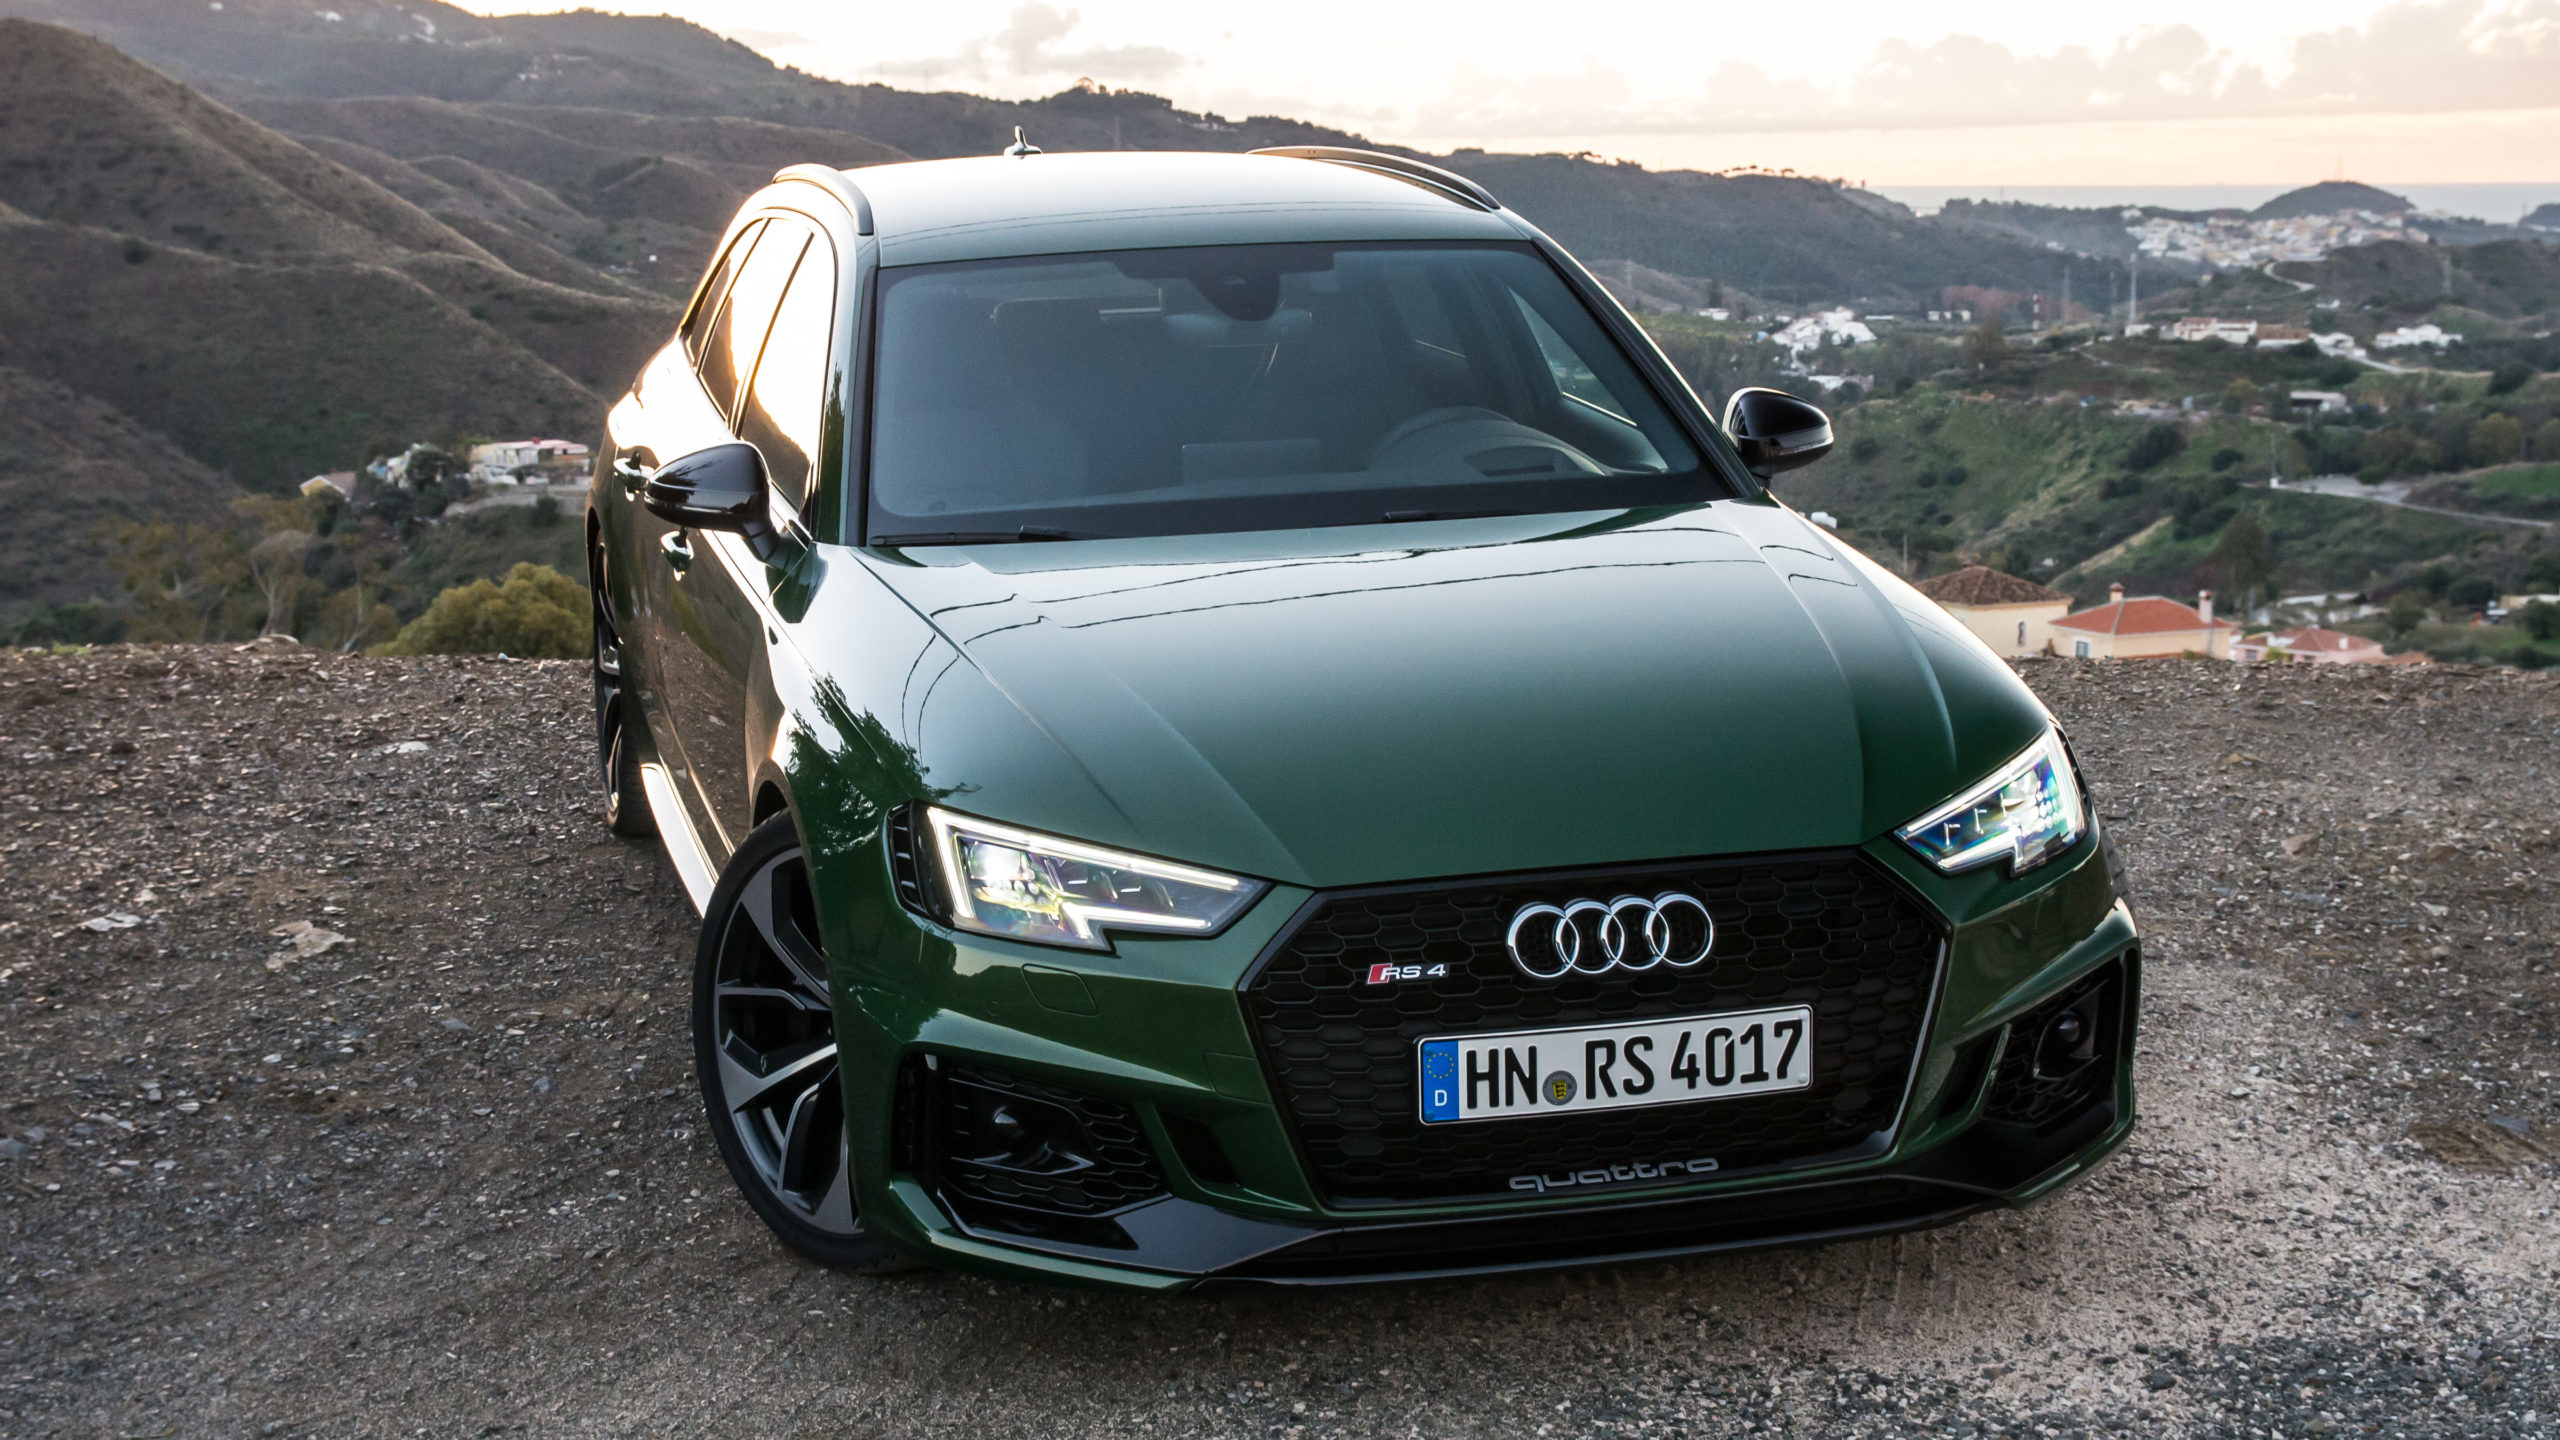 Audi RS4 Avant (2018) review: Fast, furious and also mildly practical